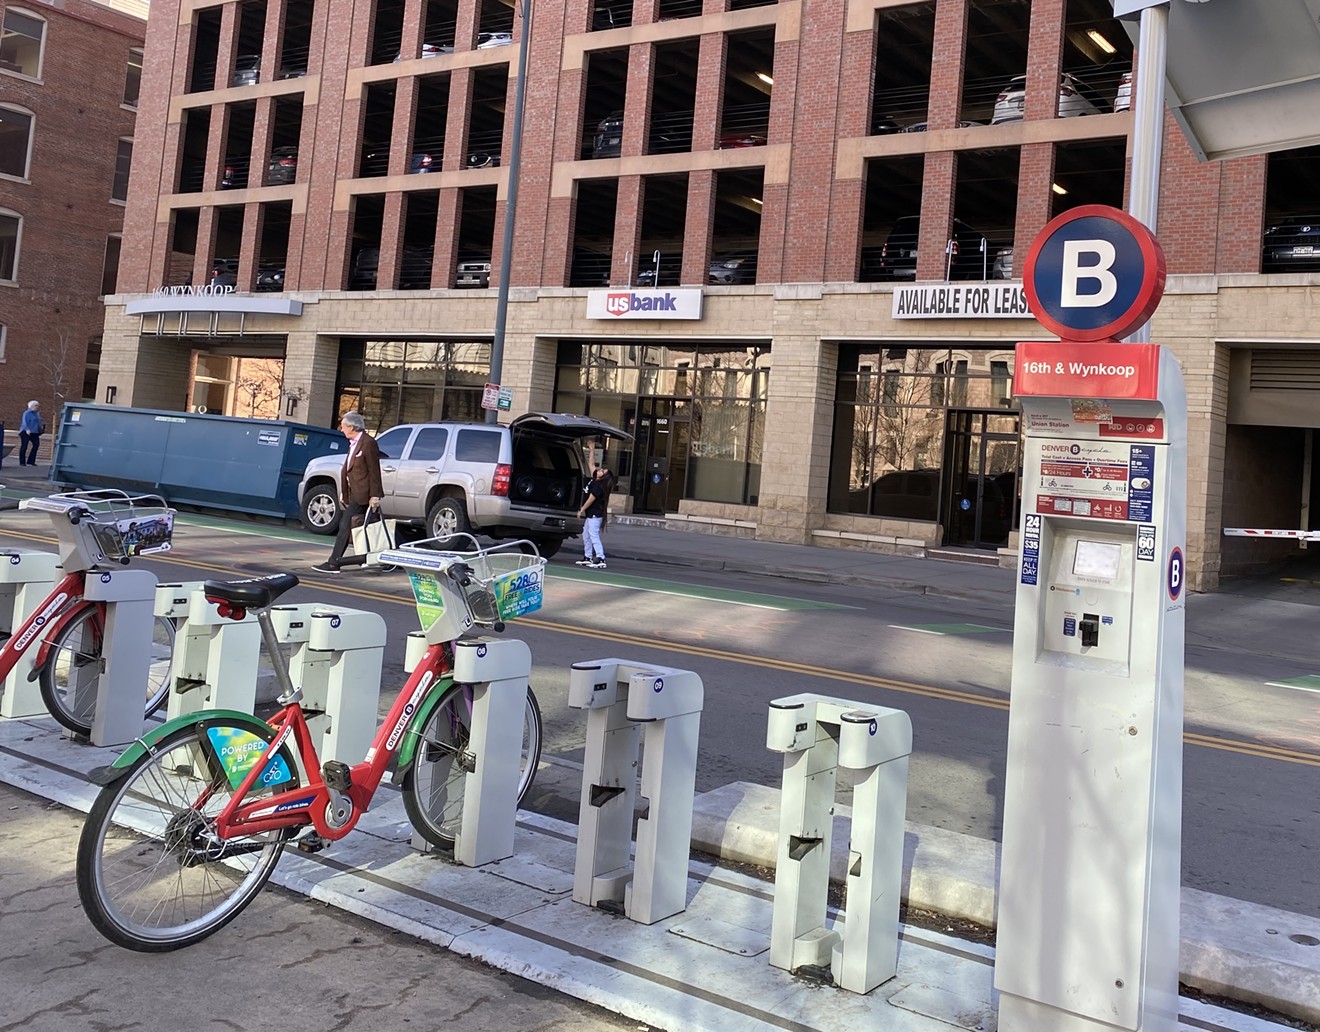 After years of declining ridership, Denver B-cycle shut down on January 30.